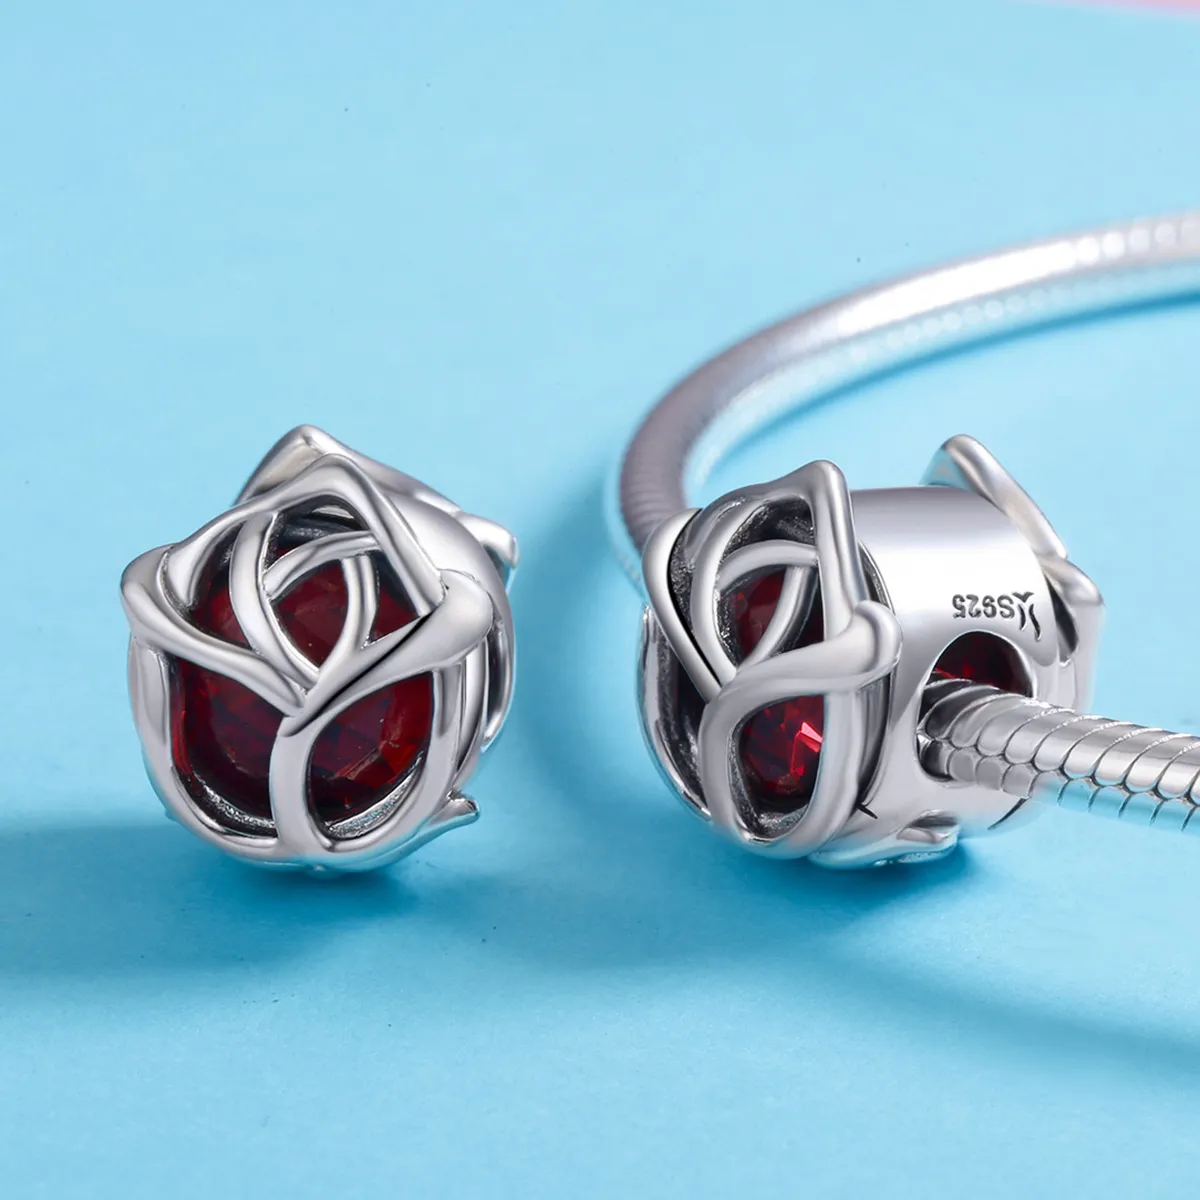 Pandora Style Silver Red Roses Charm - SCC568